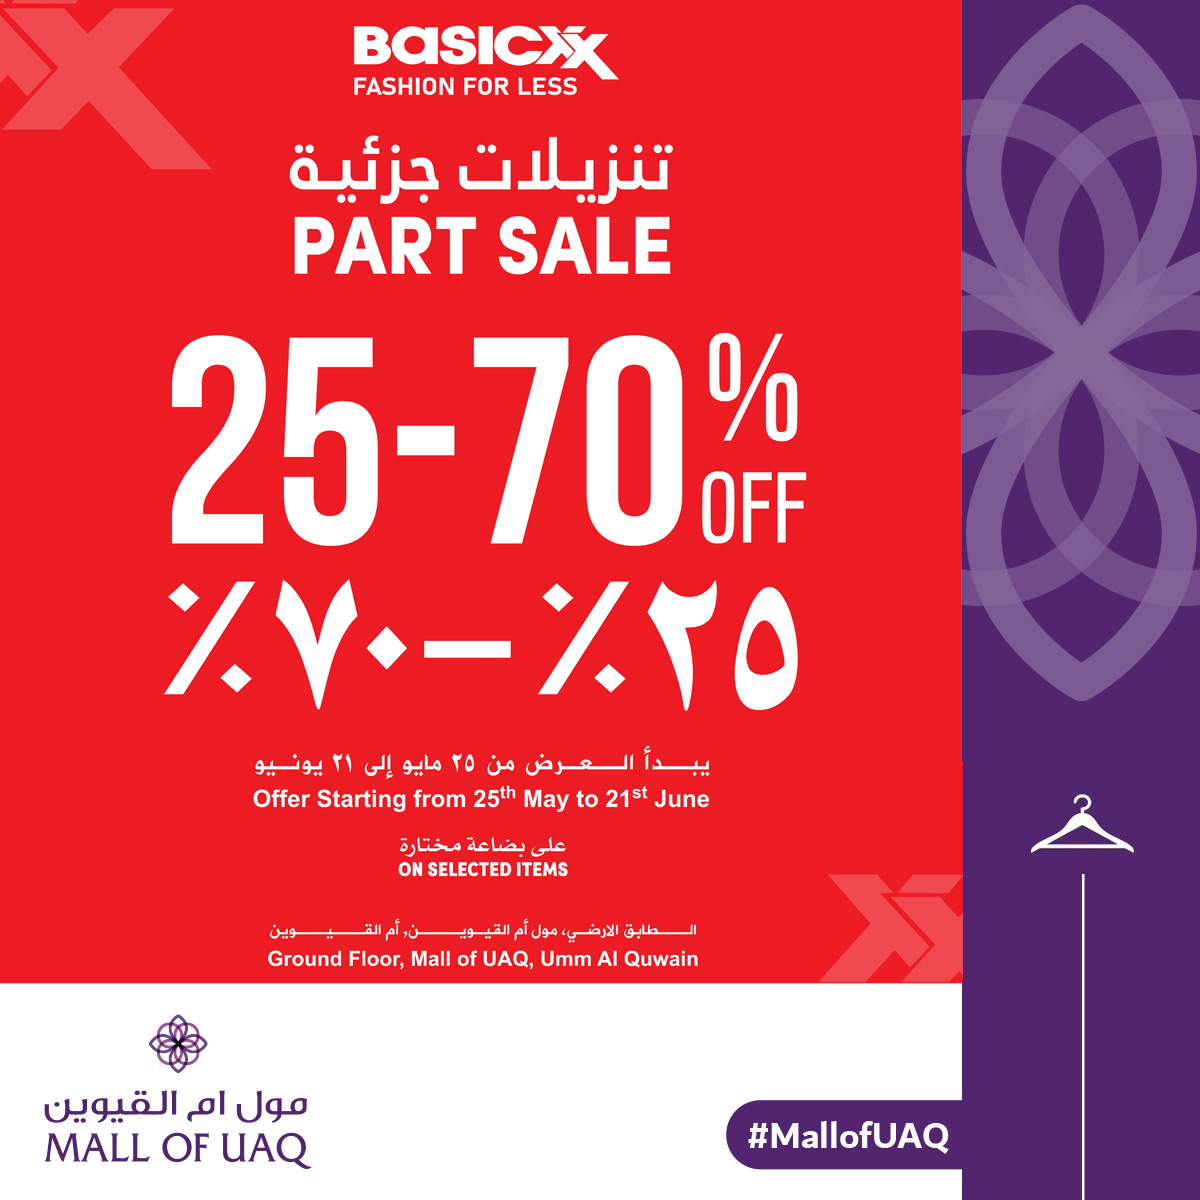 #Basicxx Fashion for Less. Get 25% up to 70% off on selected items. To find out more visit the Basicxx store at Mall of UAQ
Hurry … offer valid from 27 may to 21 June only… 🛍🛍🛍

#MallofUAQ #InUAQ #Basicxx #PartSale #Fashionforless